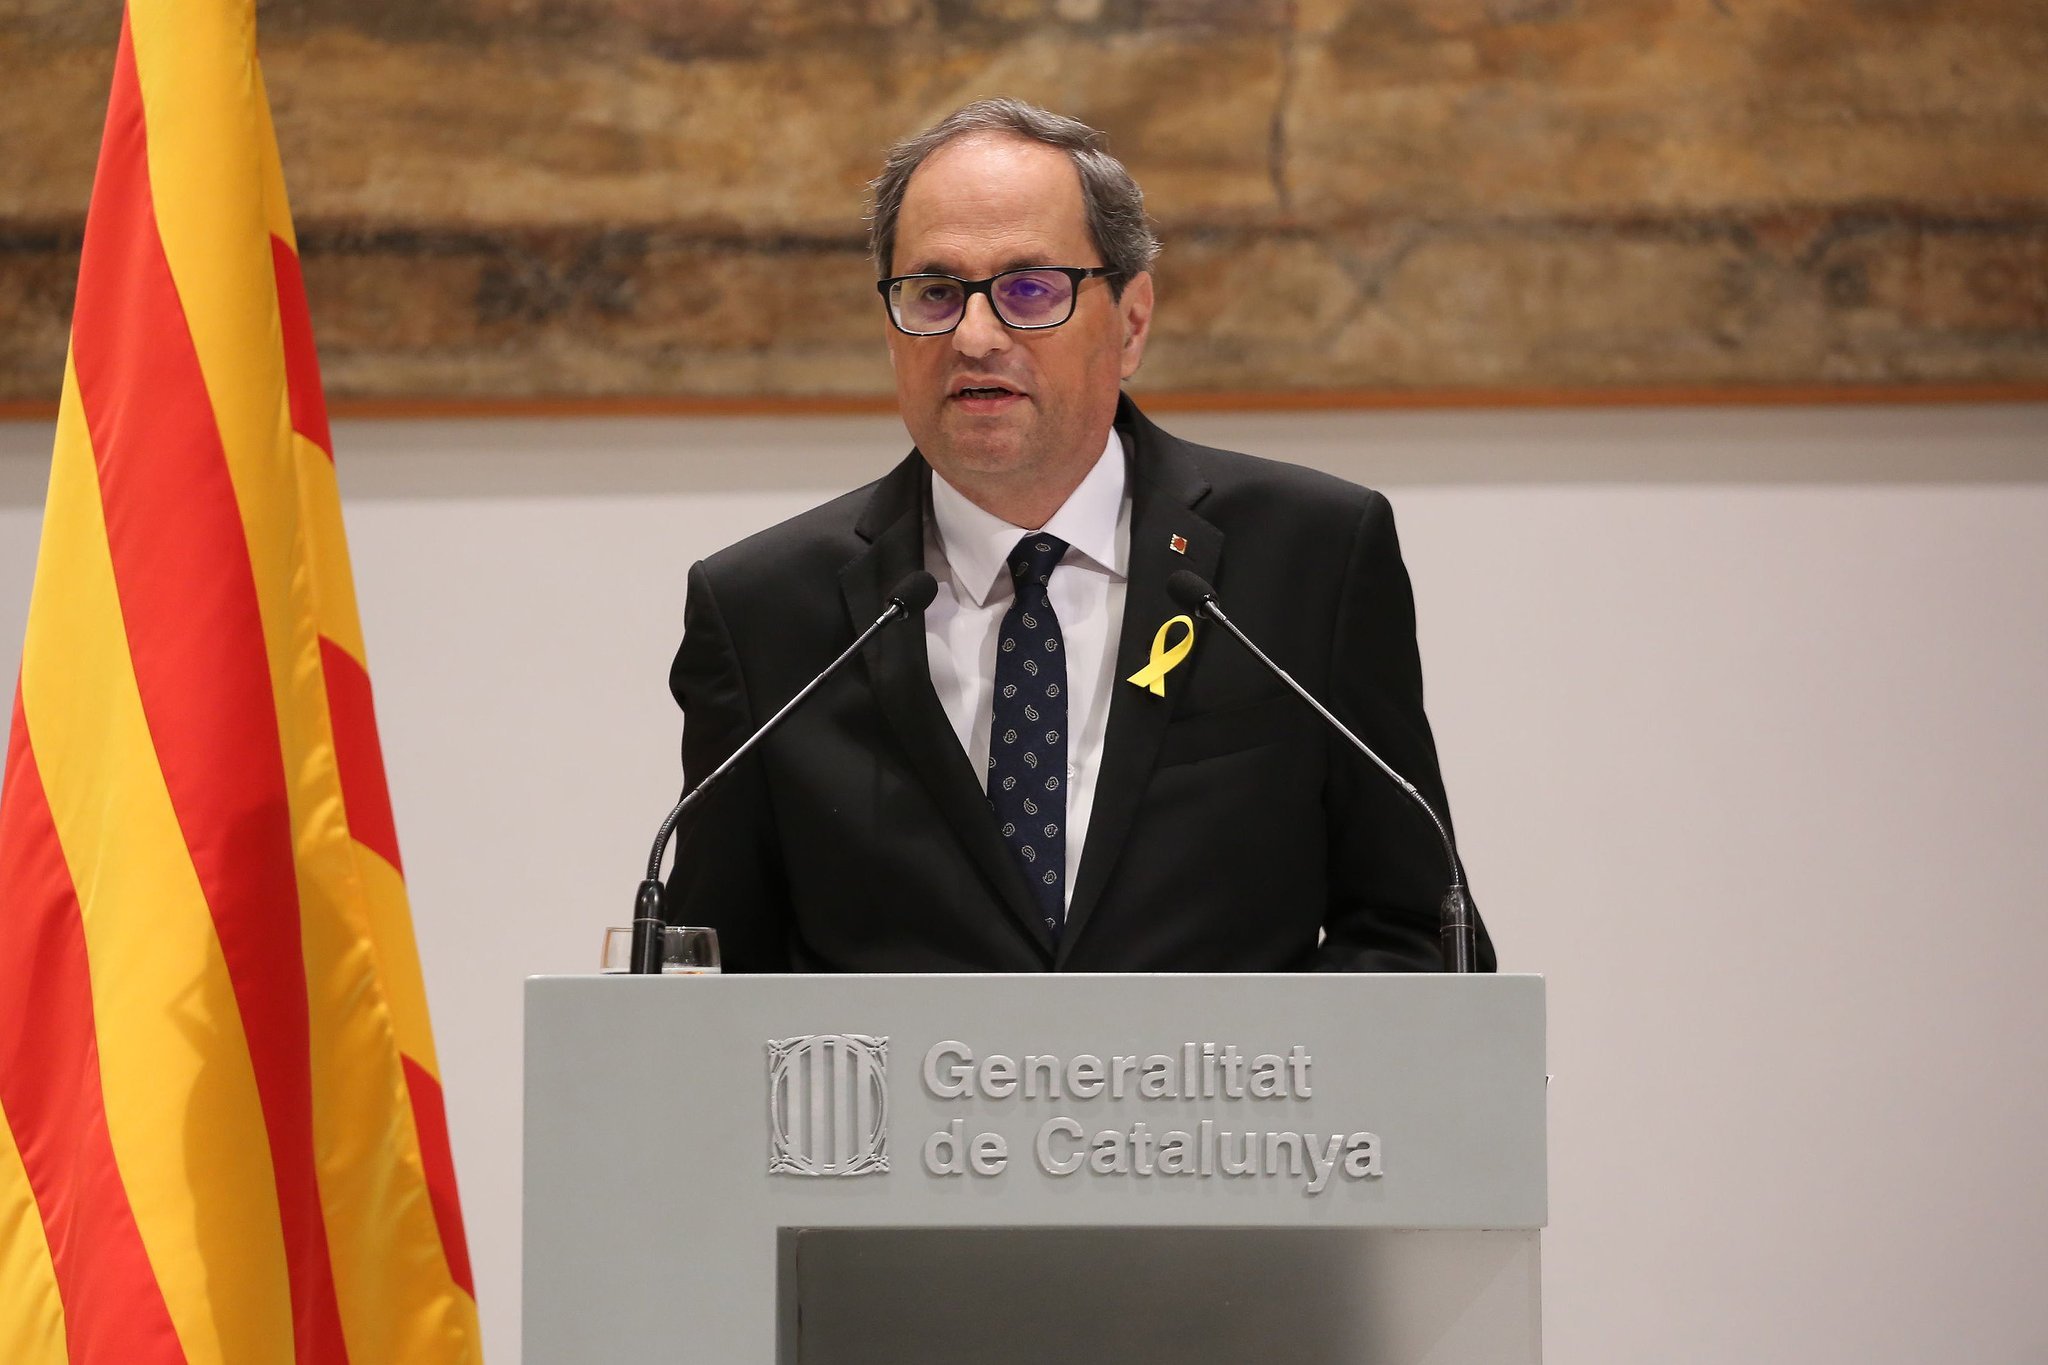 Catalonia to break off its relationship with the Spanish monarchy, says Torra